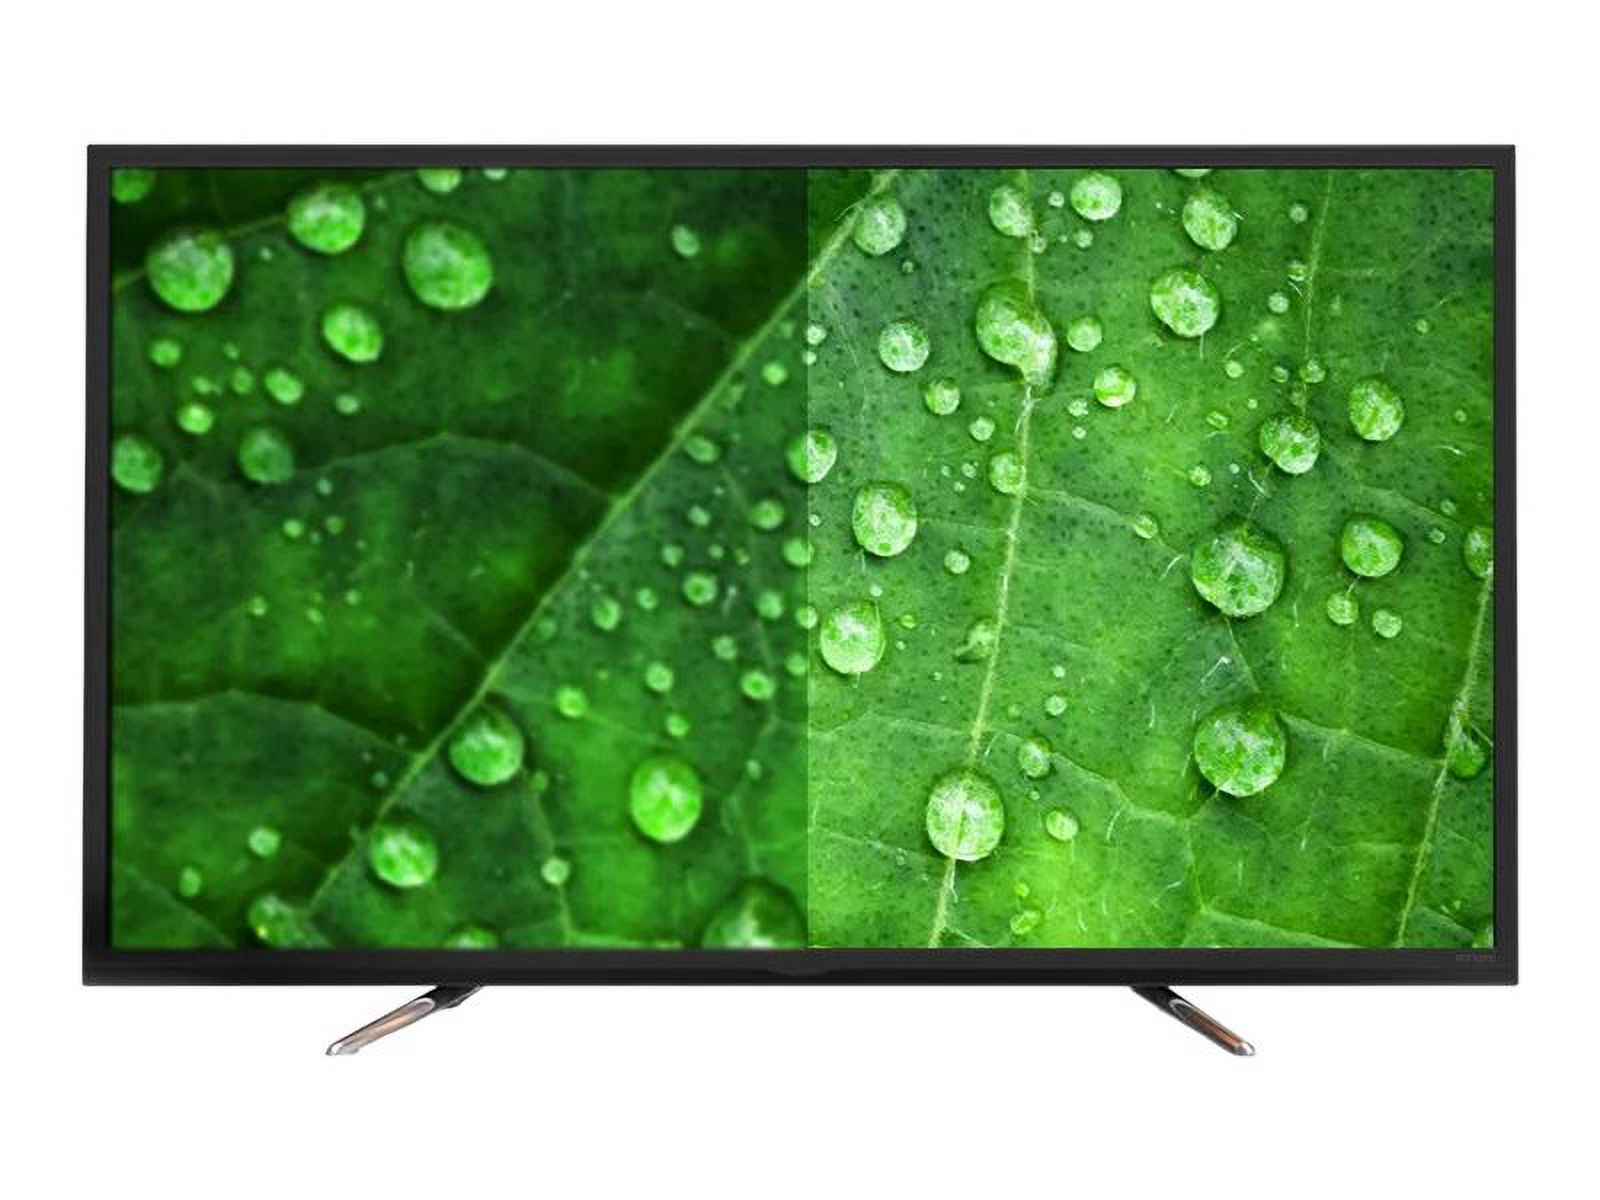 ATYME 65" Class 4K (2160P) LED TV (650AM7UD) - image 2 of 18